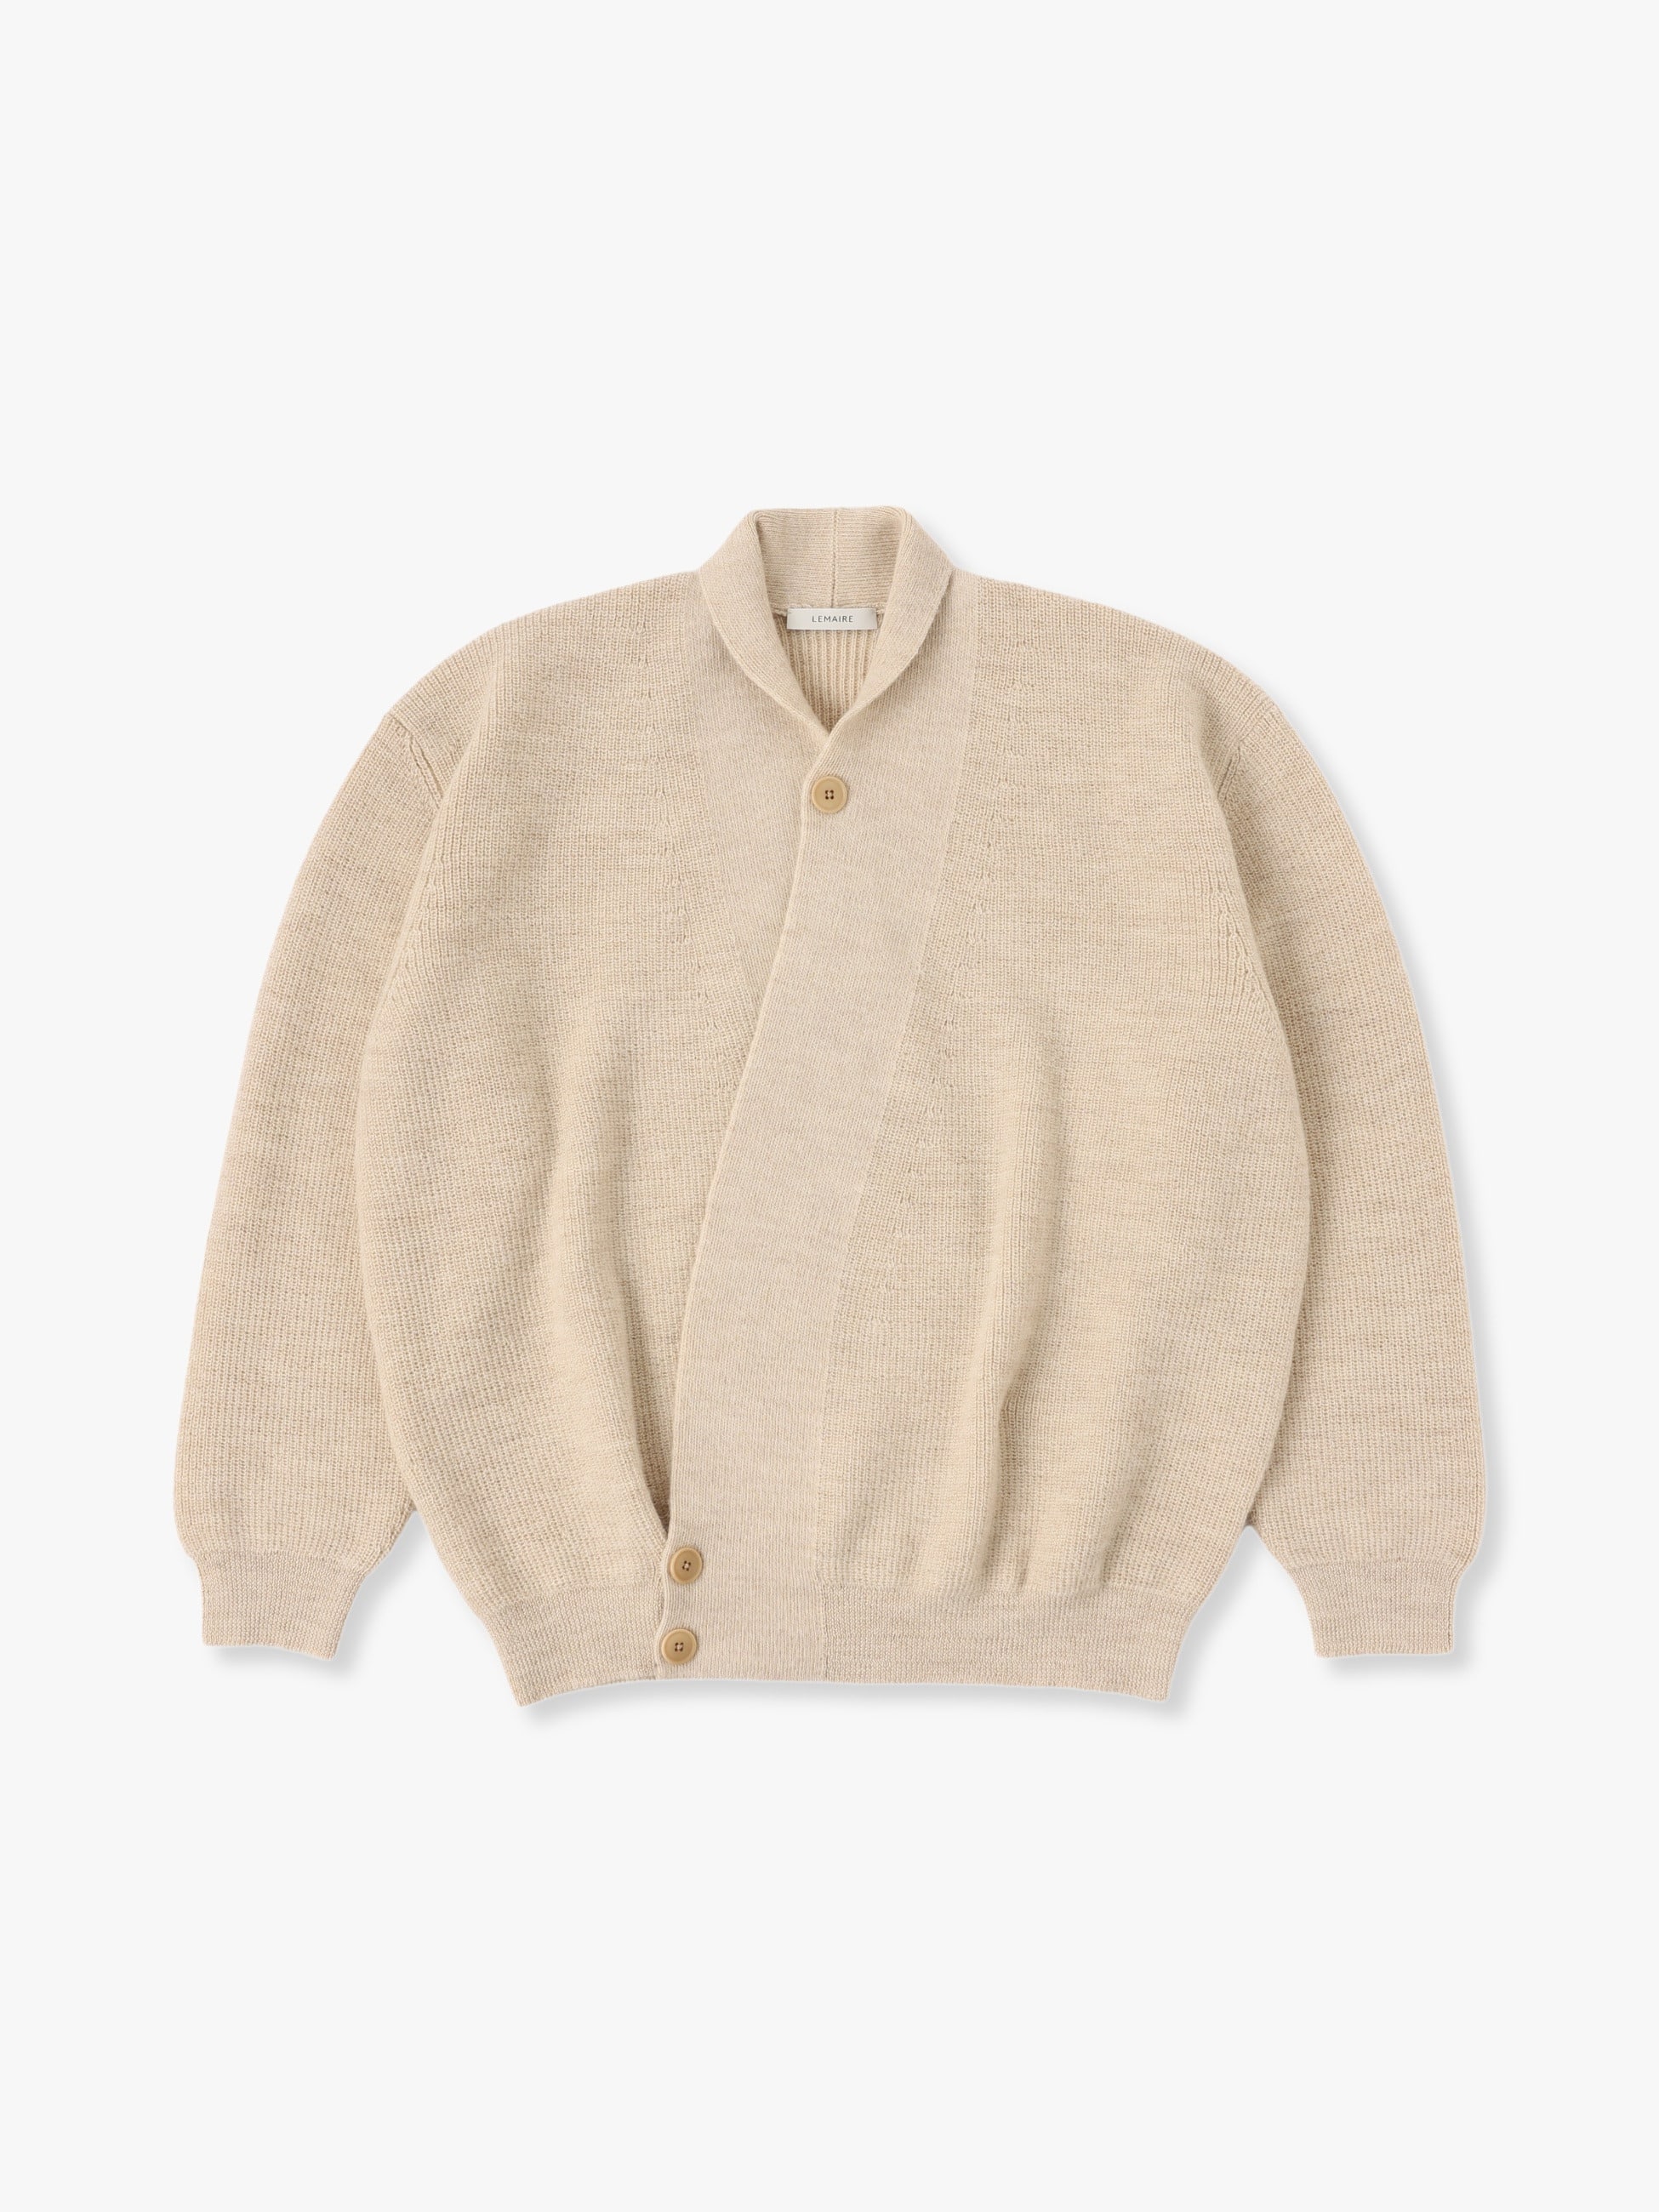 Wrapped Knit Cardigan｜LEMAIRE(ルメール)｜Ron Herman